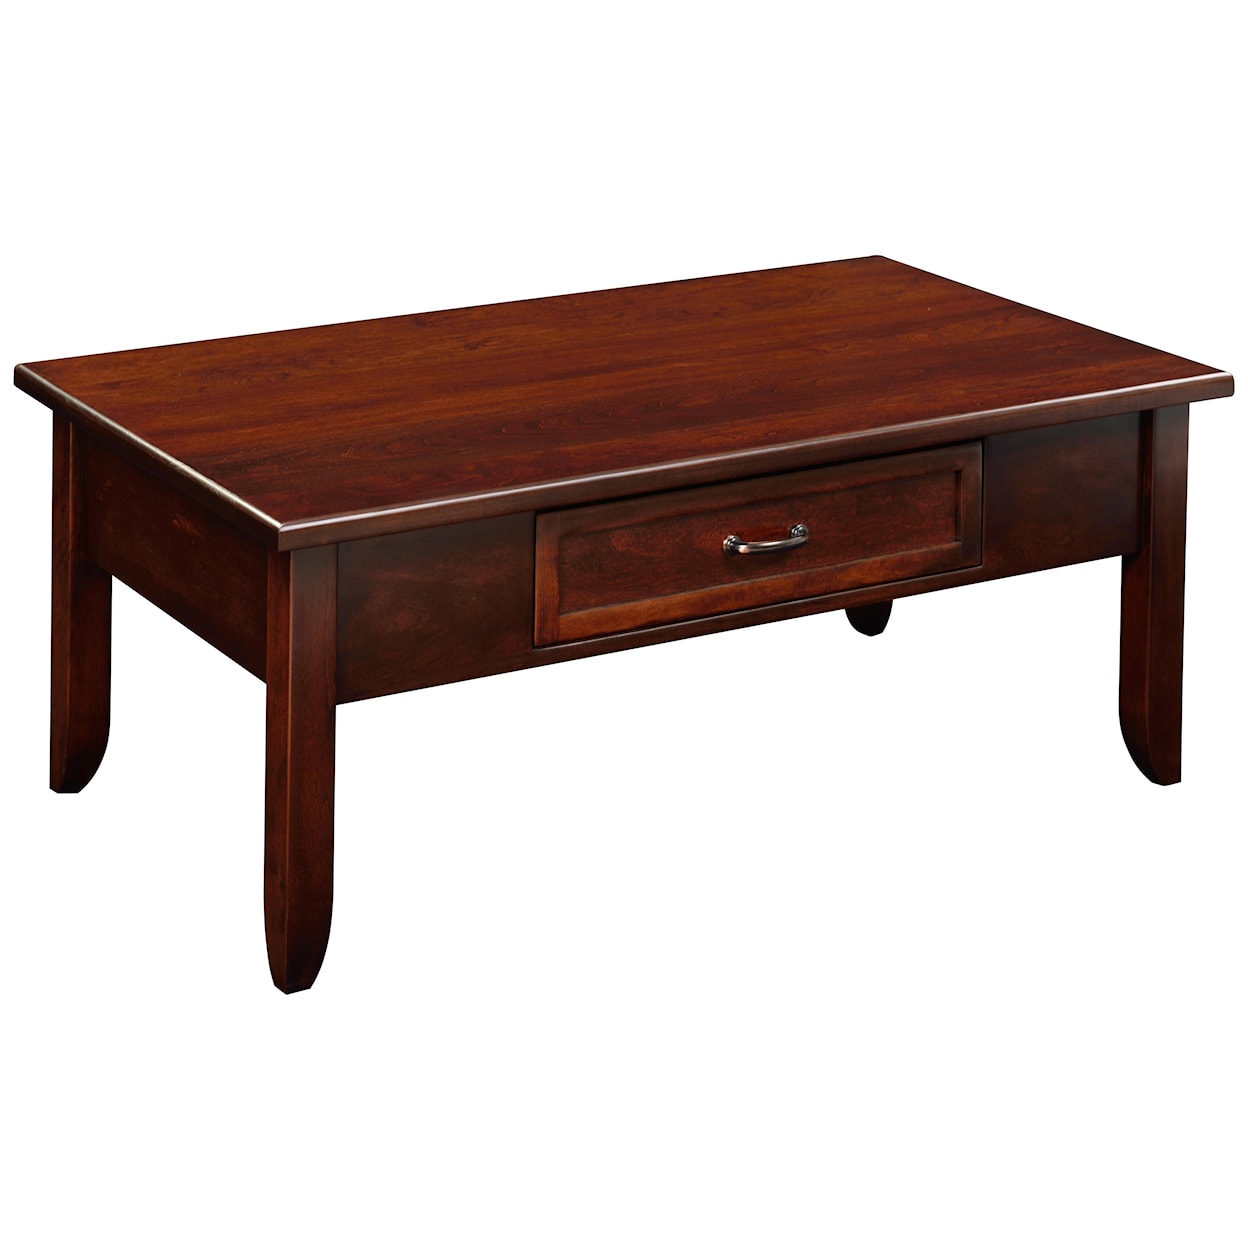 America's Amish Heirlooms Strasburg Coffee Table w/ 1 Drawer in Cherry Wood